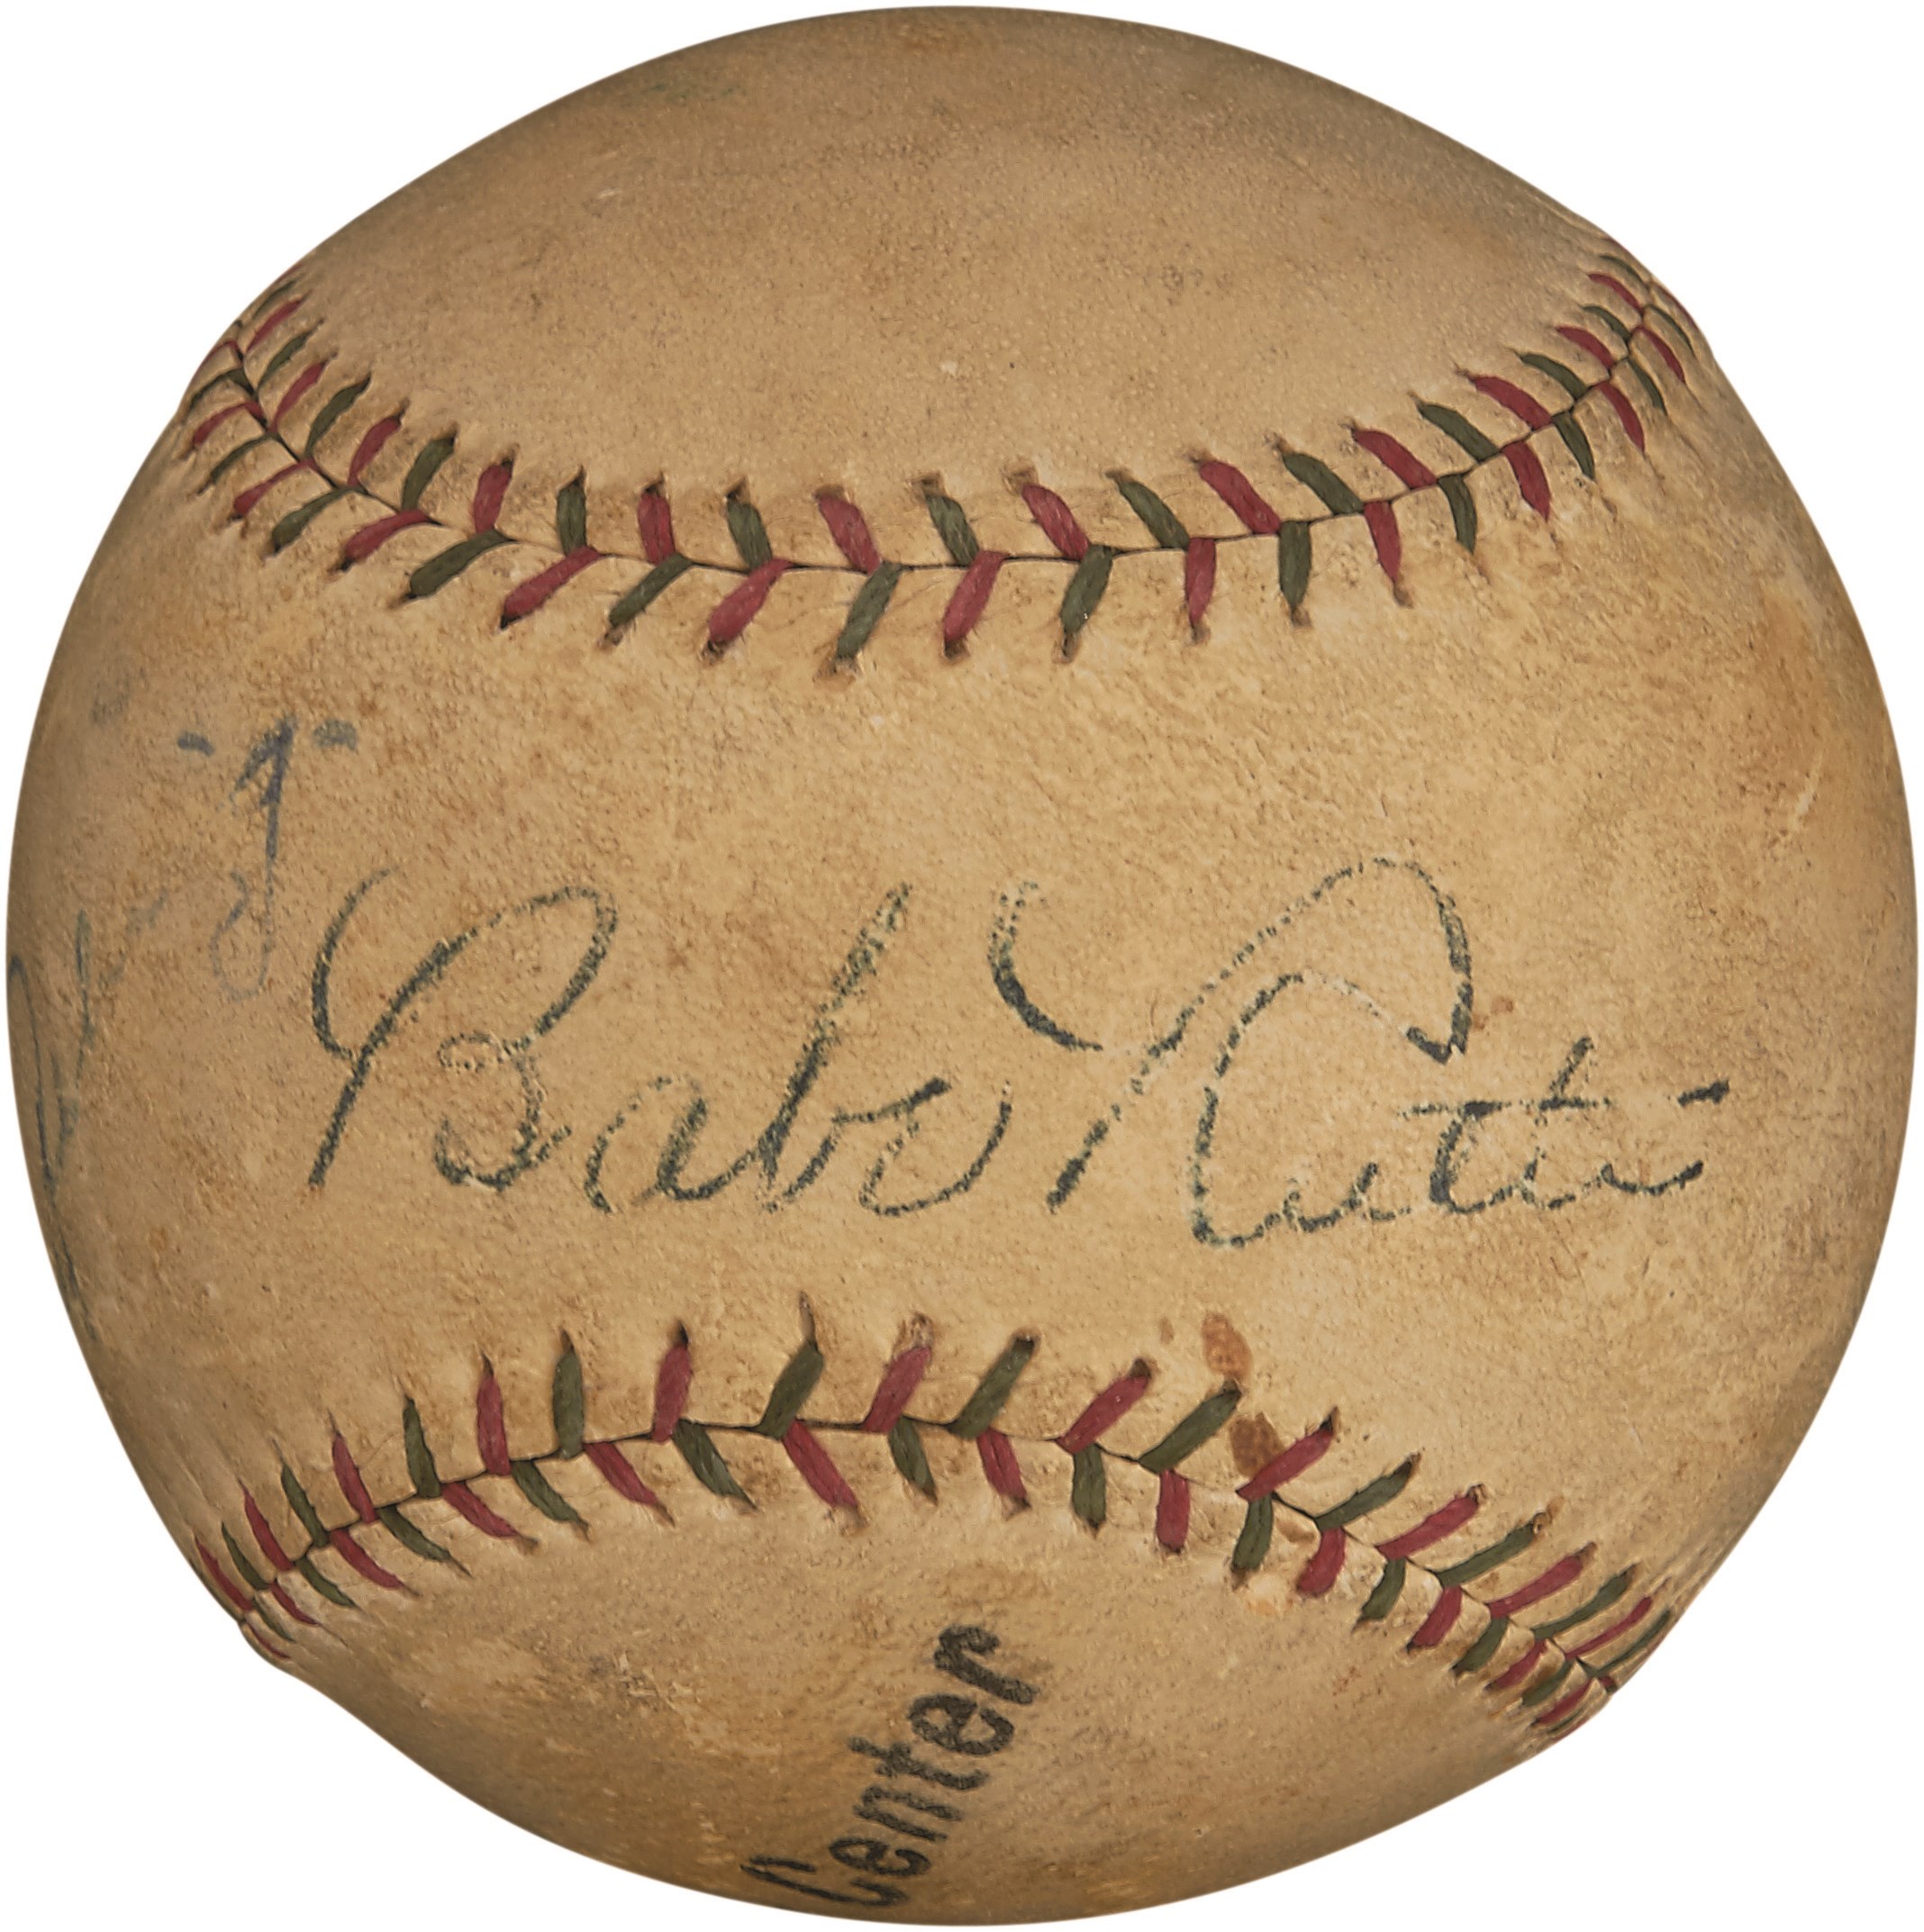 Ruth and Gehrig - Babe Ruth and Lou Gehrig Signed Baseball (PSA)